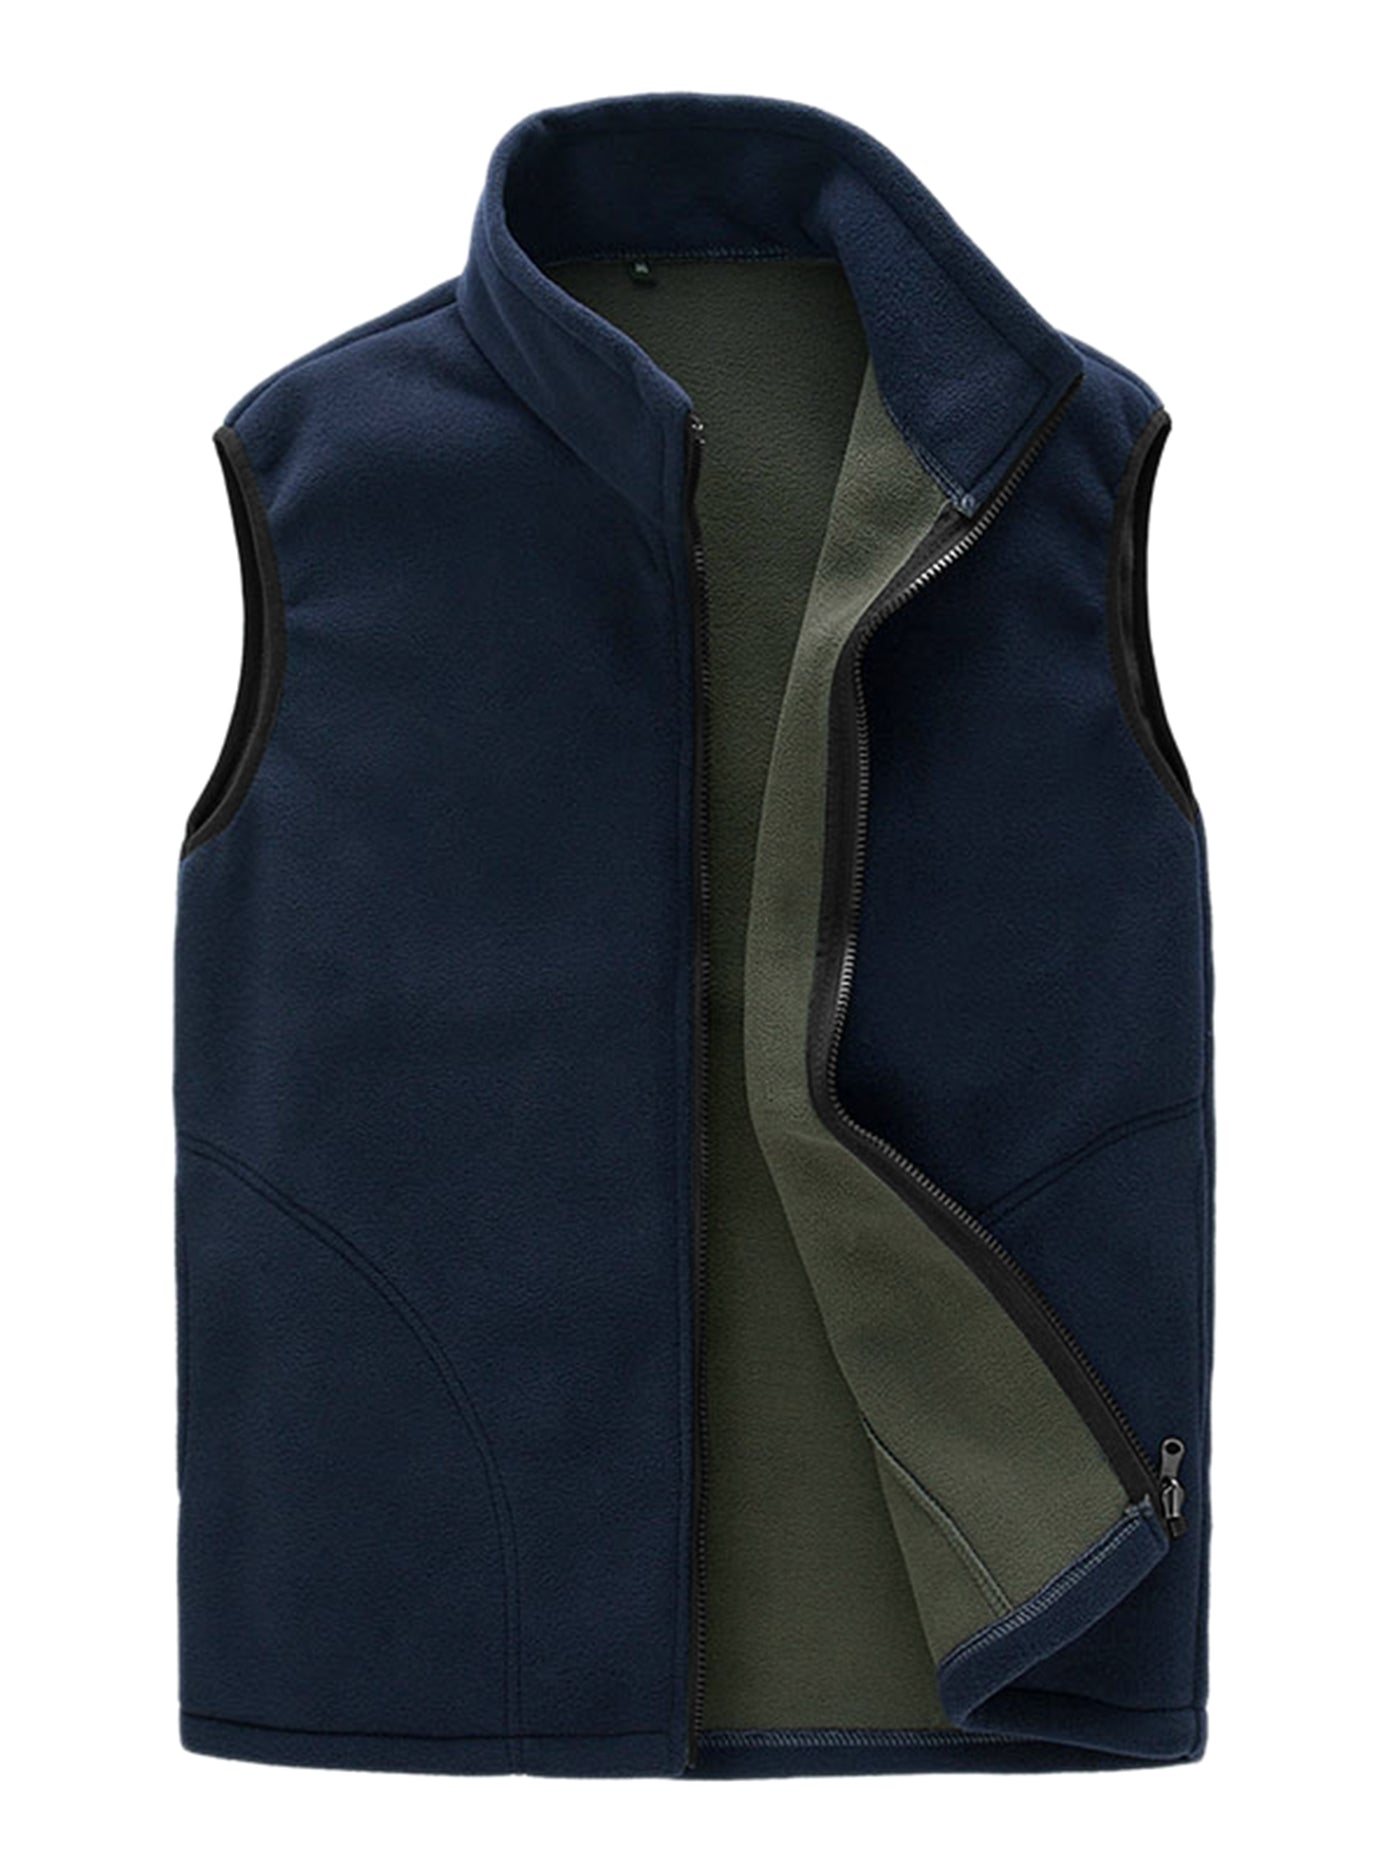 Bublédon Solid Stand Collar Zip Plush Sleeveless Outdoor Vest